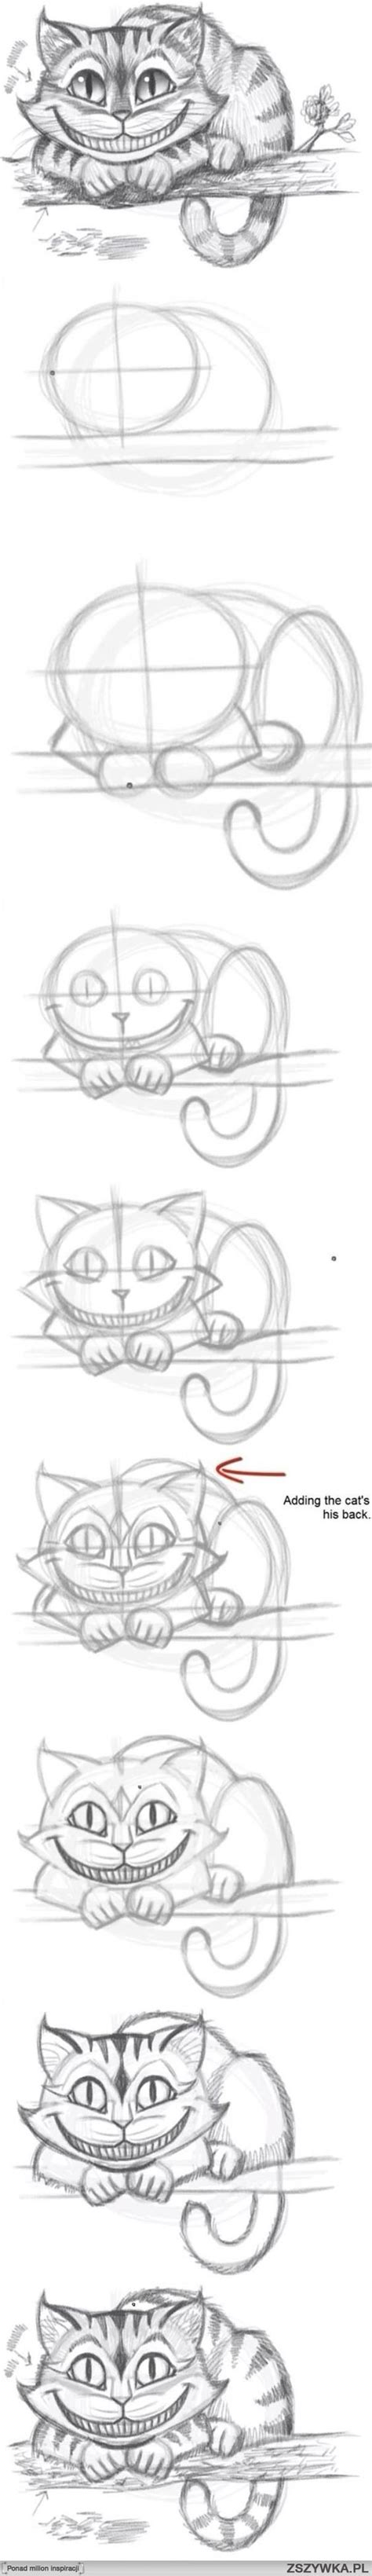 Cheshire Cat From Alice In Wonderland How To Draw The Cheshire Cat